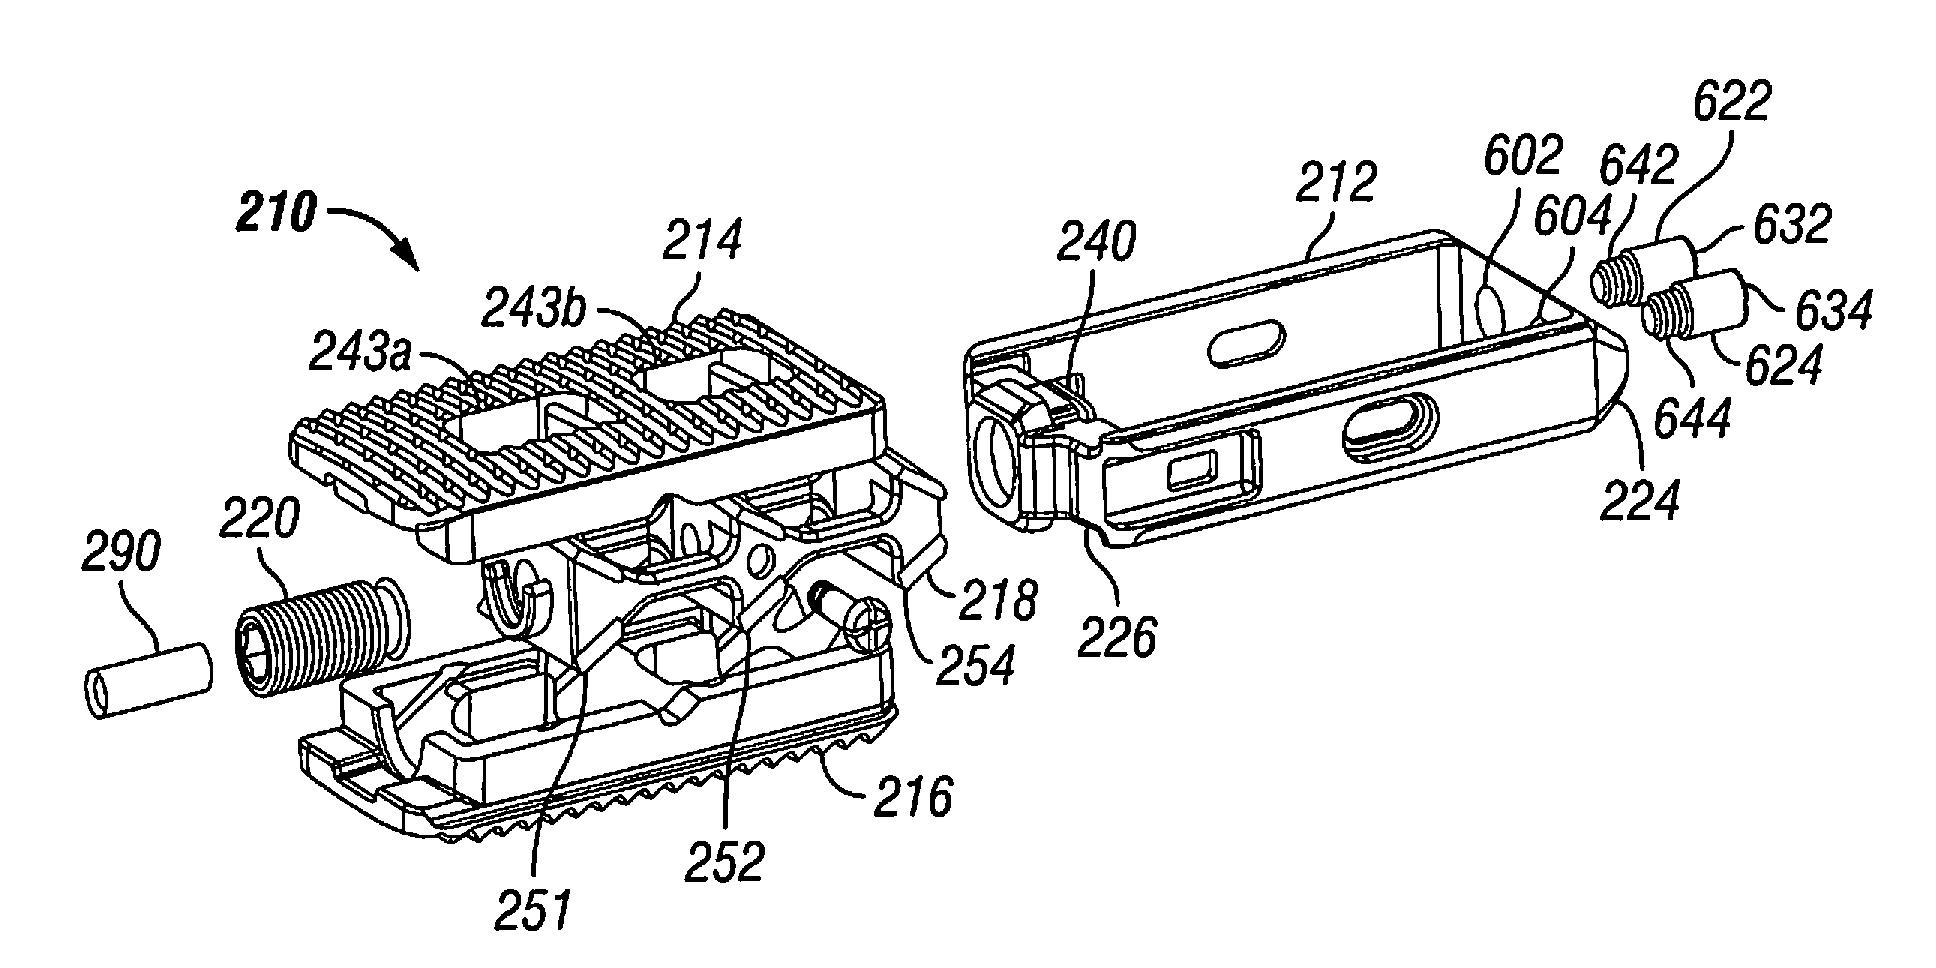 Expandable fusion device and method of installation thereof